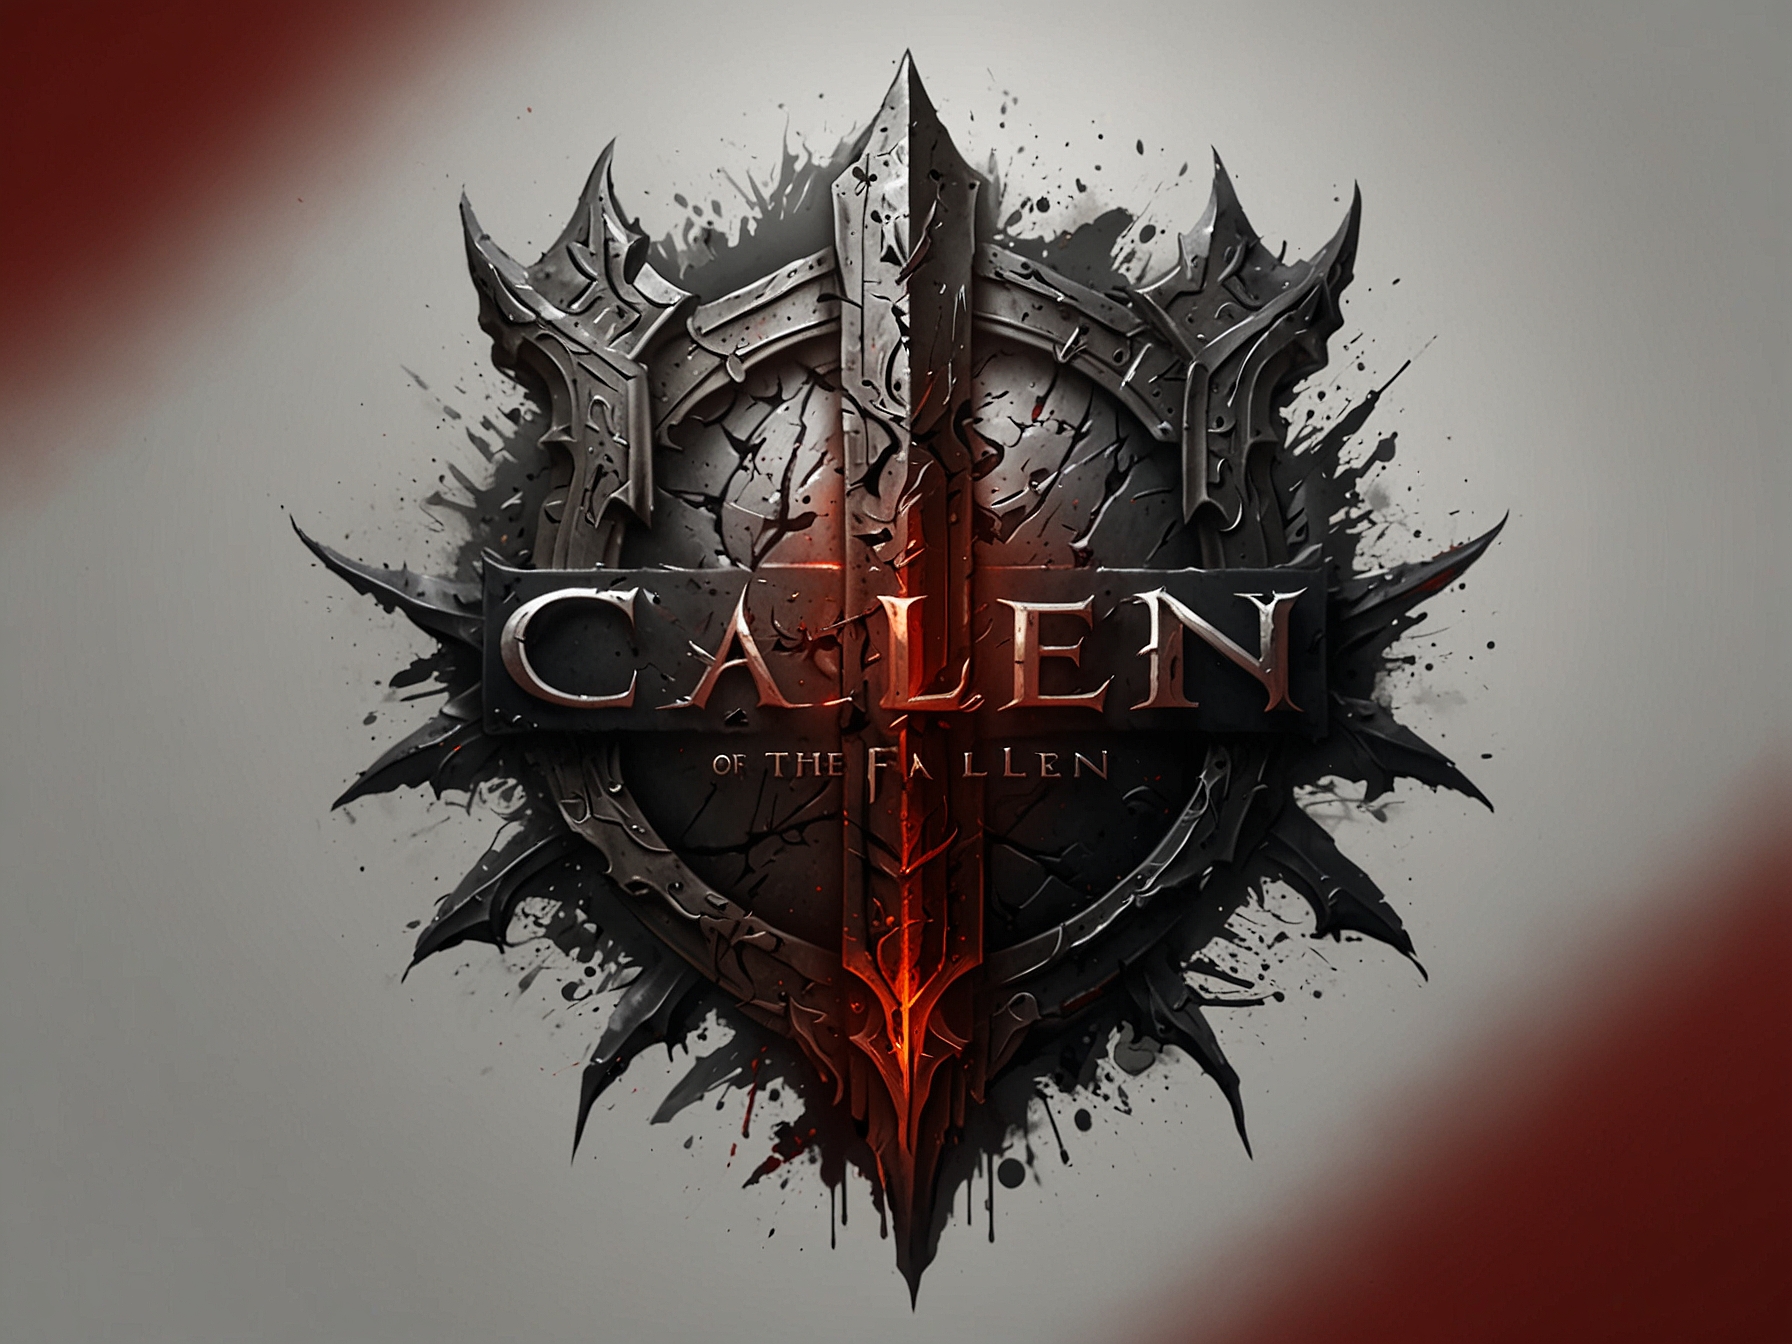 CI Games' official logo, the publisher behind Lords of the Fallen 2, which is aiming for a 2026 release.